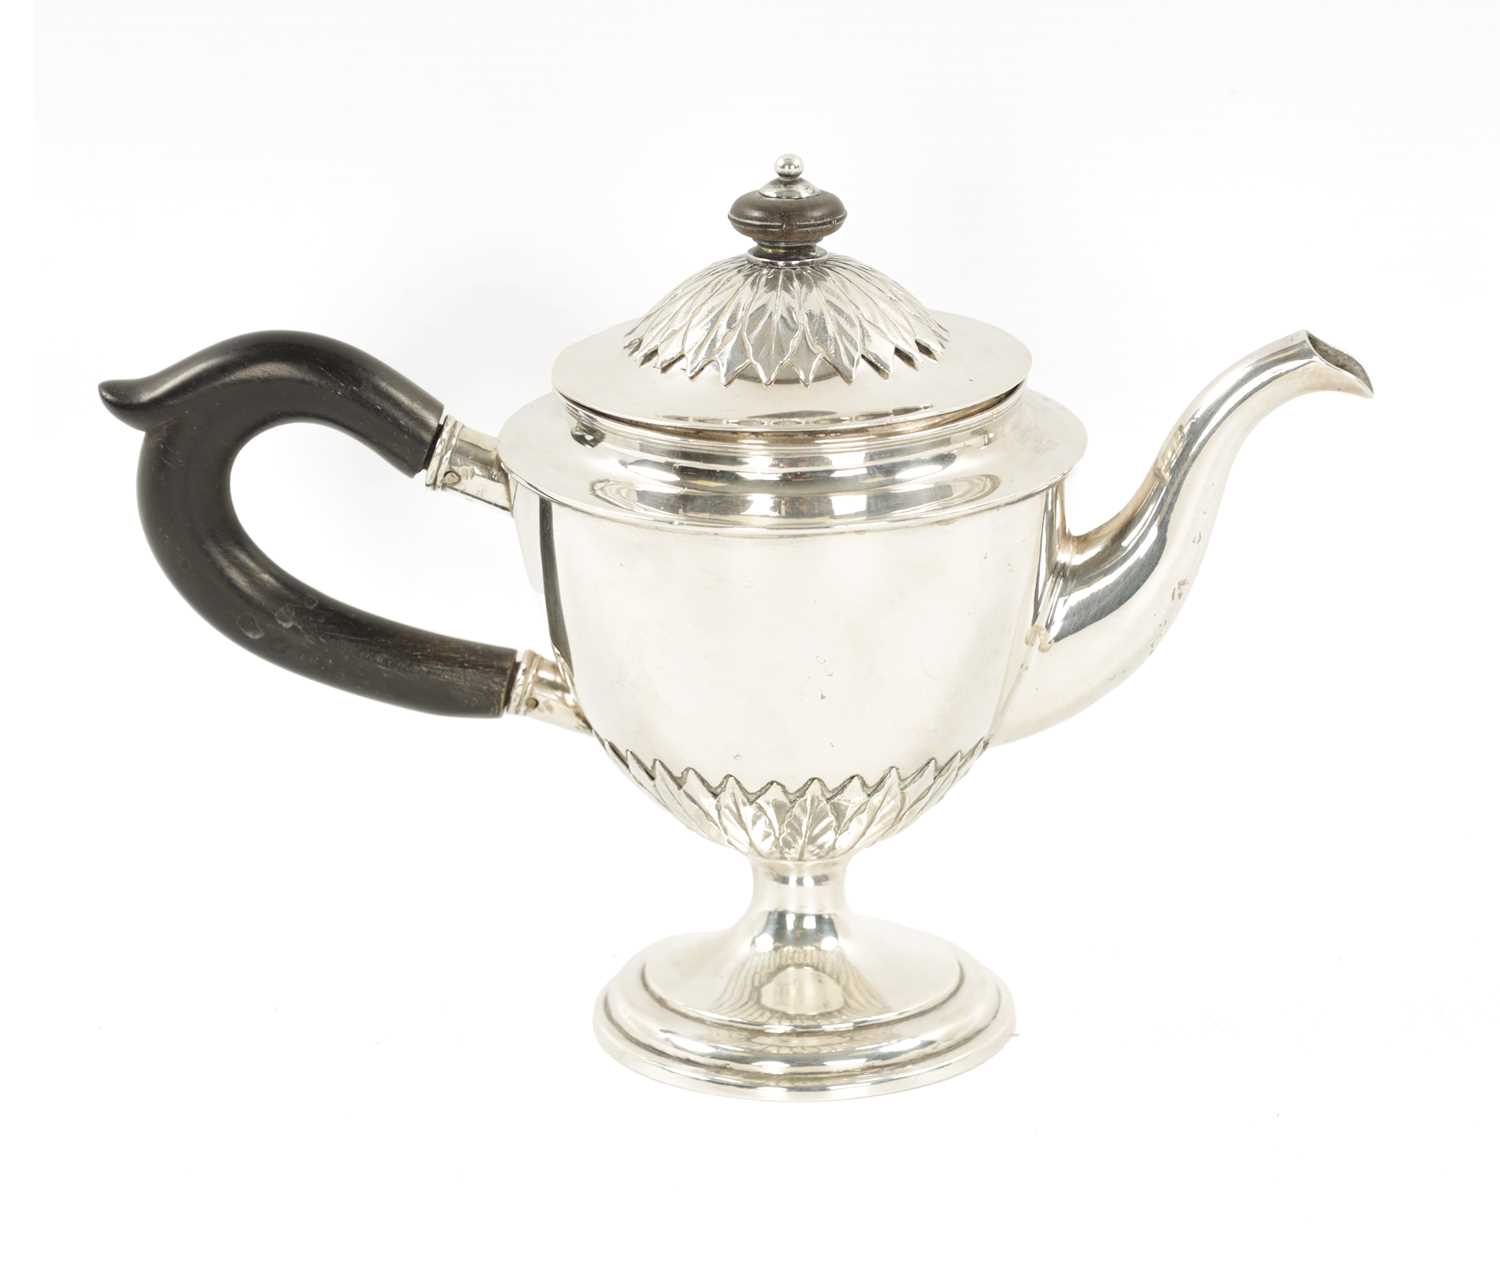 AN EARLY 19TH CENTURY CONTINENTAL SILVER TEAPOT - POSSIBLY BALTIC